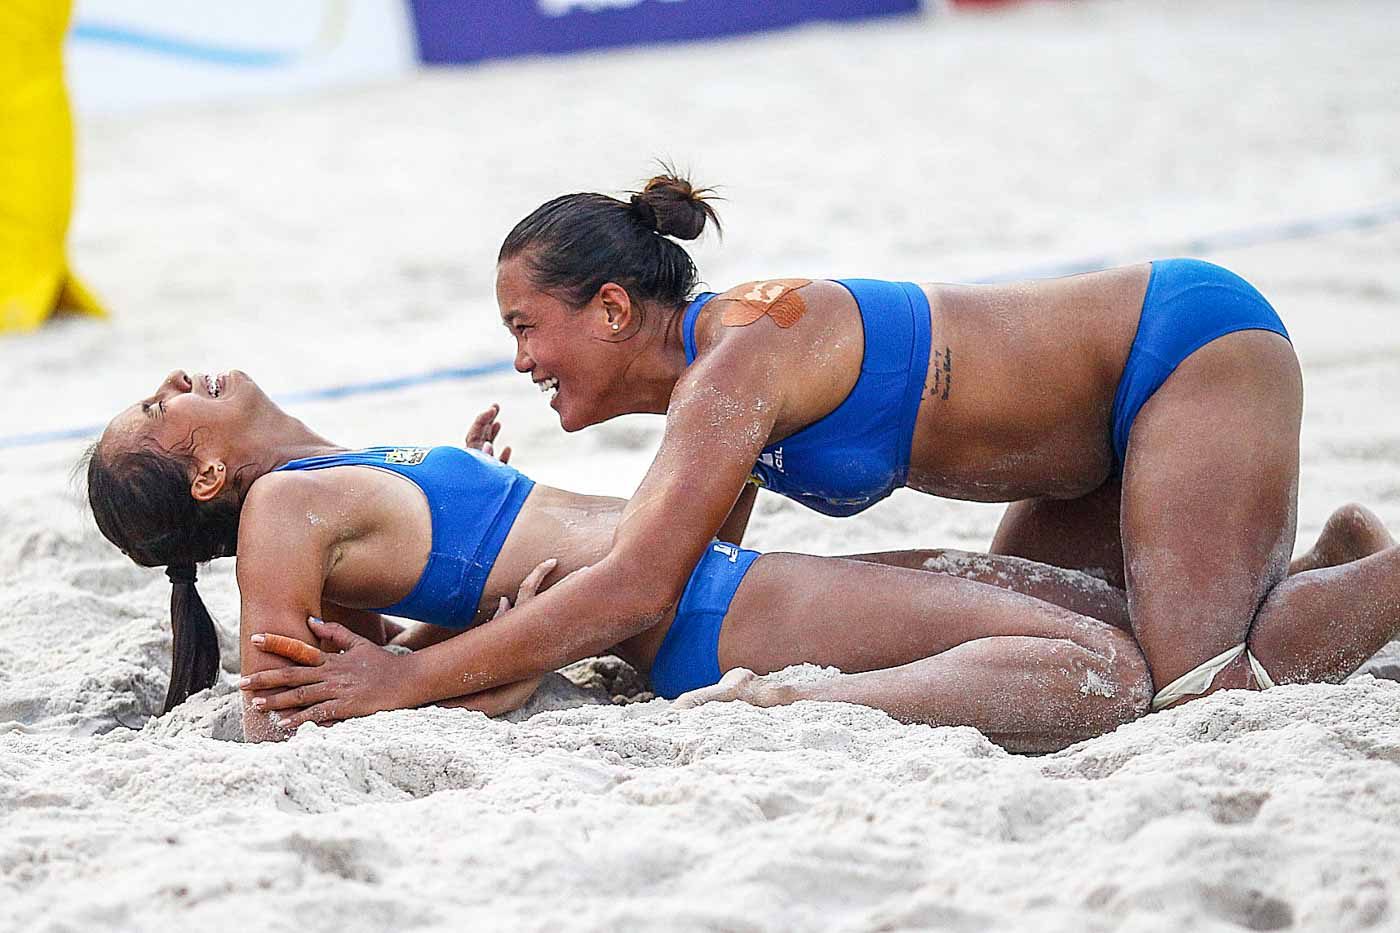 Gonzaga, Bautista carry RC Cola Army A to PSL beach volleyball crown